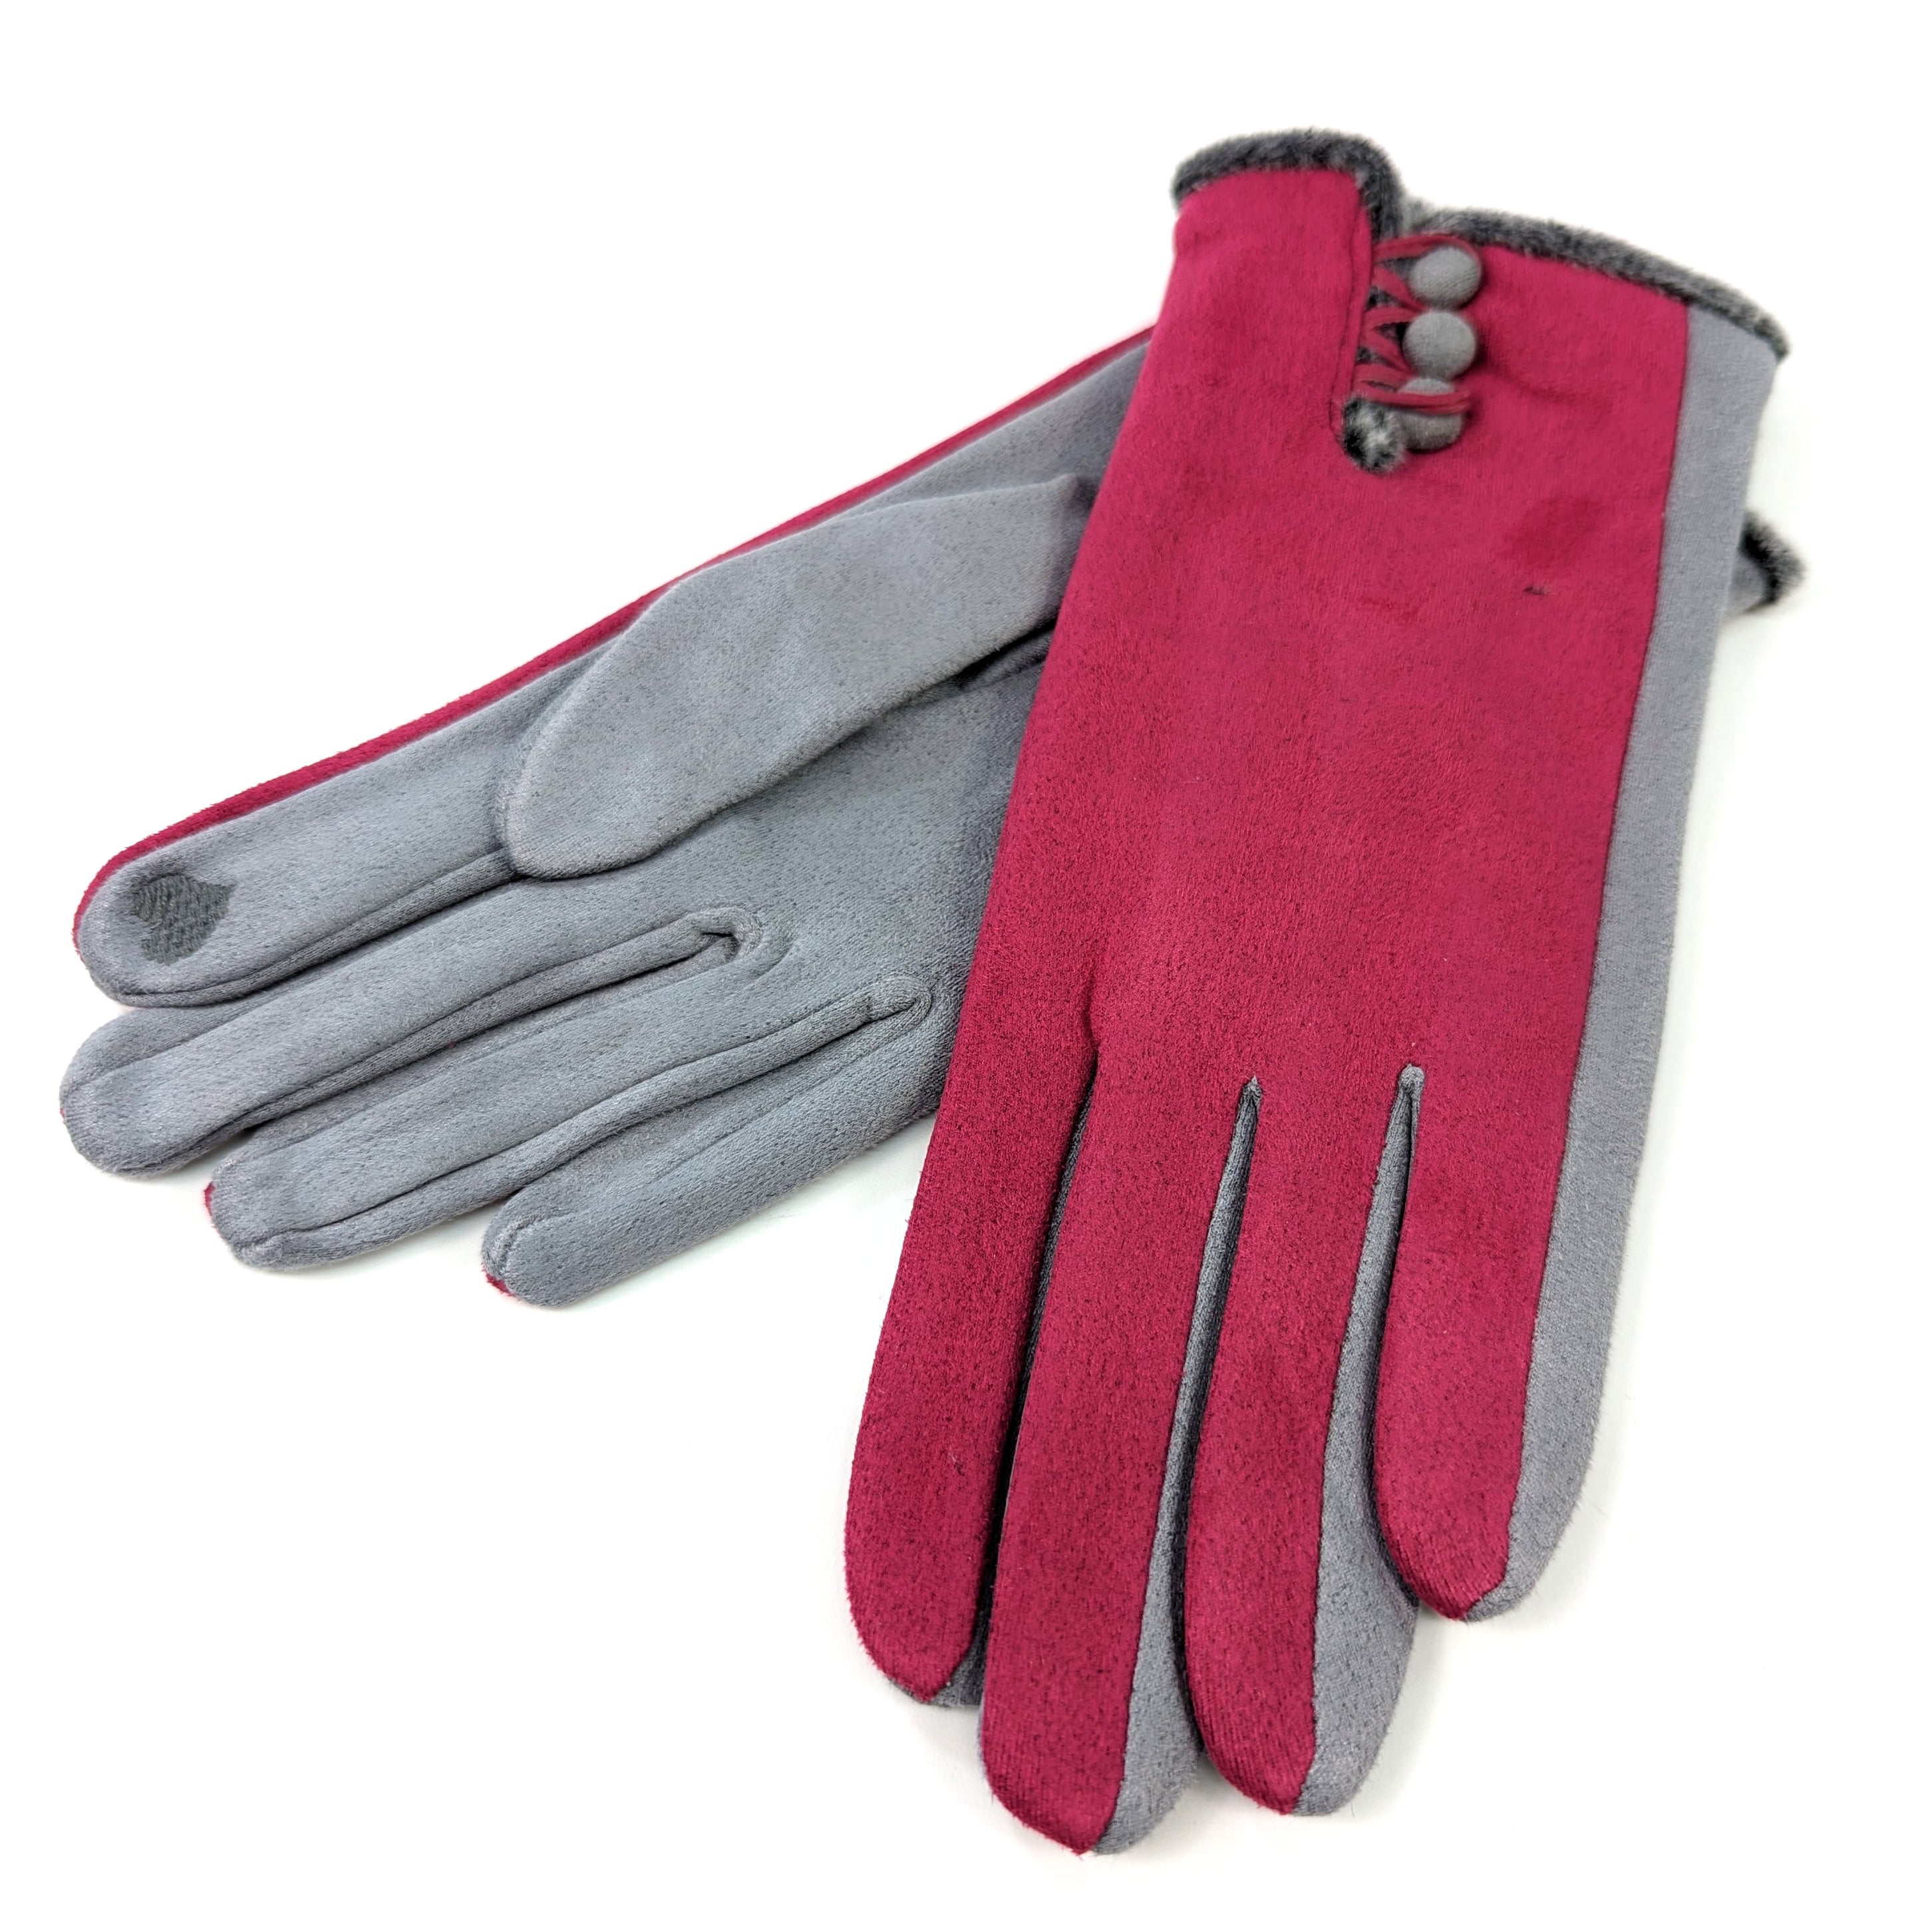 Bicolour Suede Effect Gloves with Faux Fur Trim - Pink/Grey